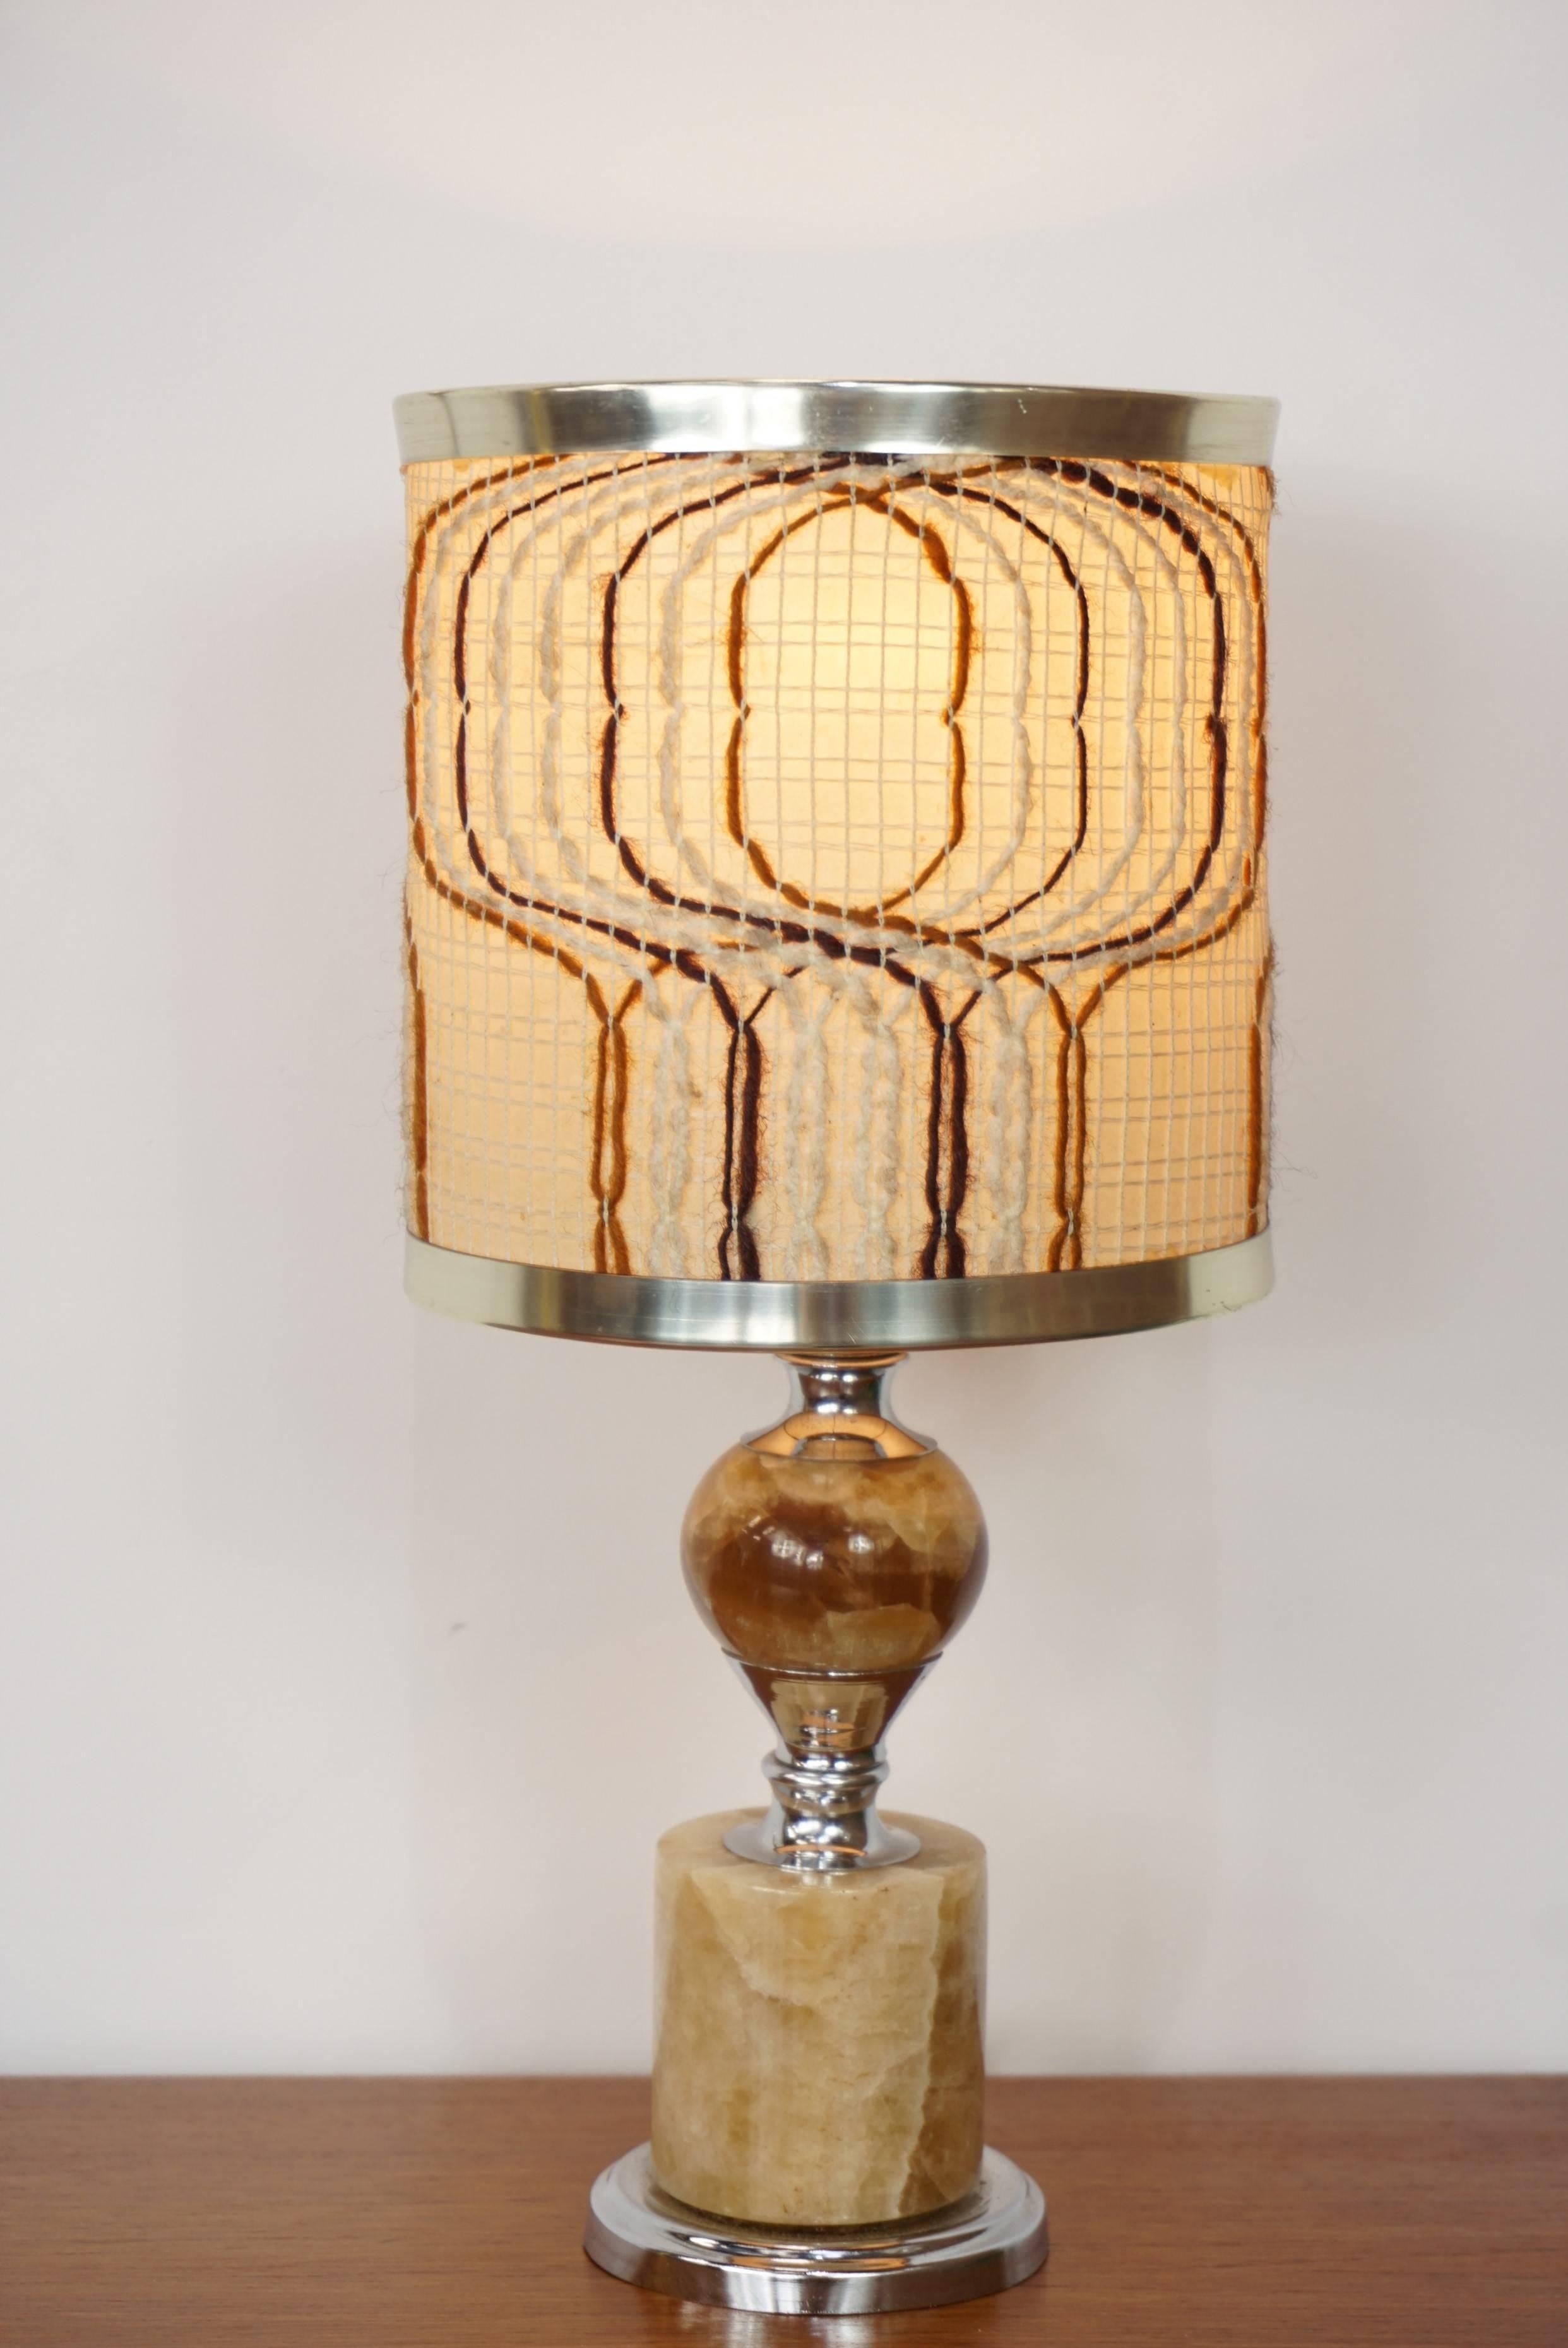 20th Century Onyx and Chrome Lamp from the 1970s